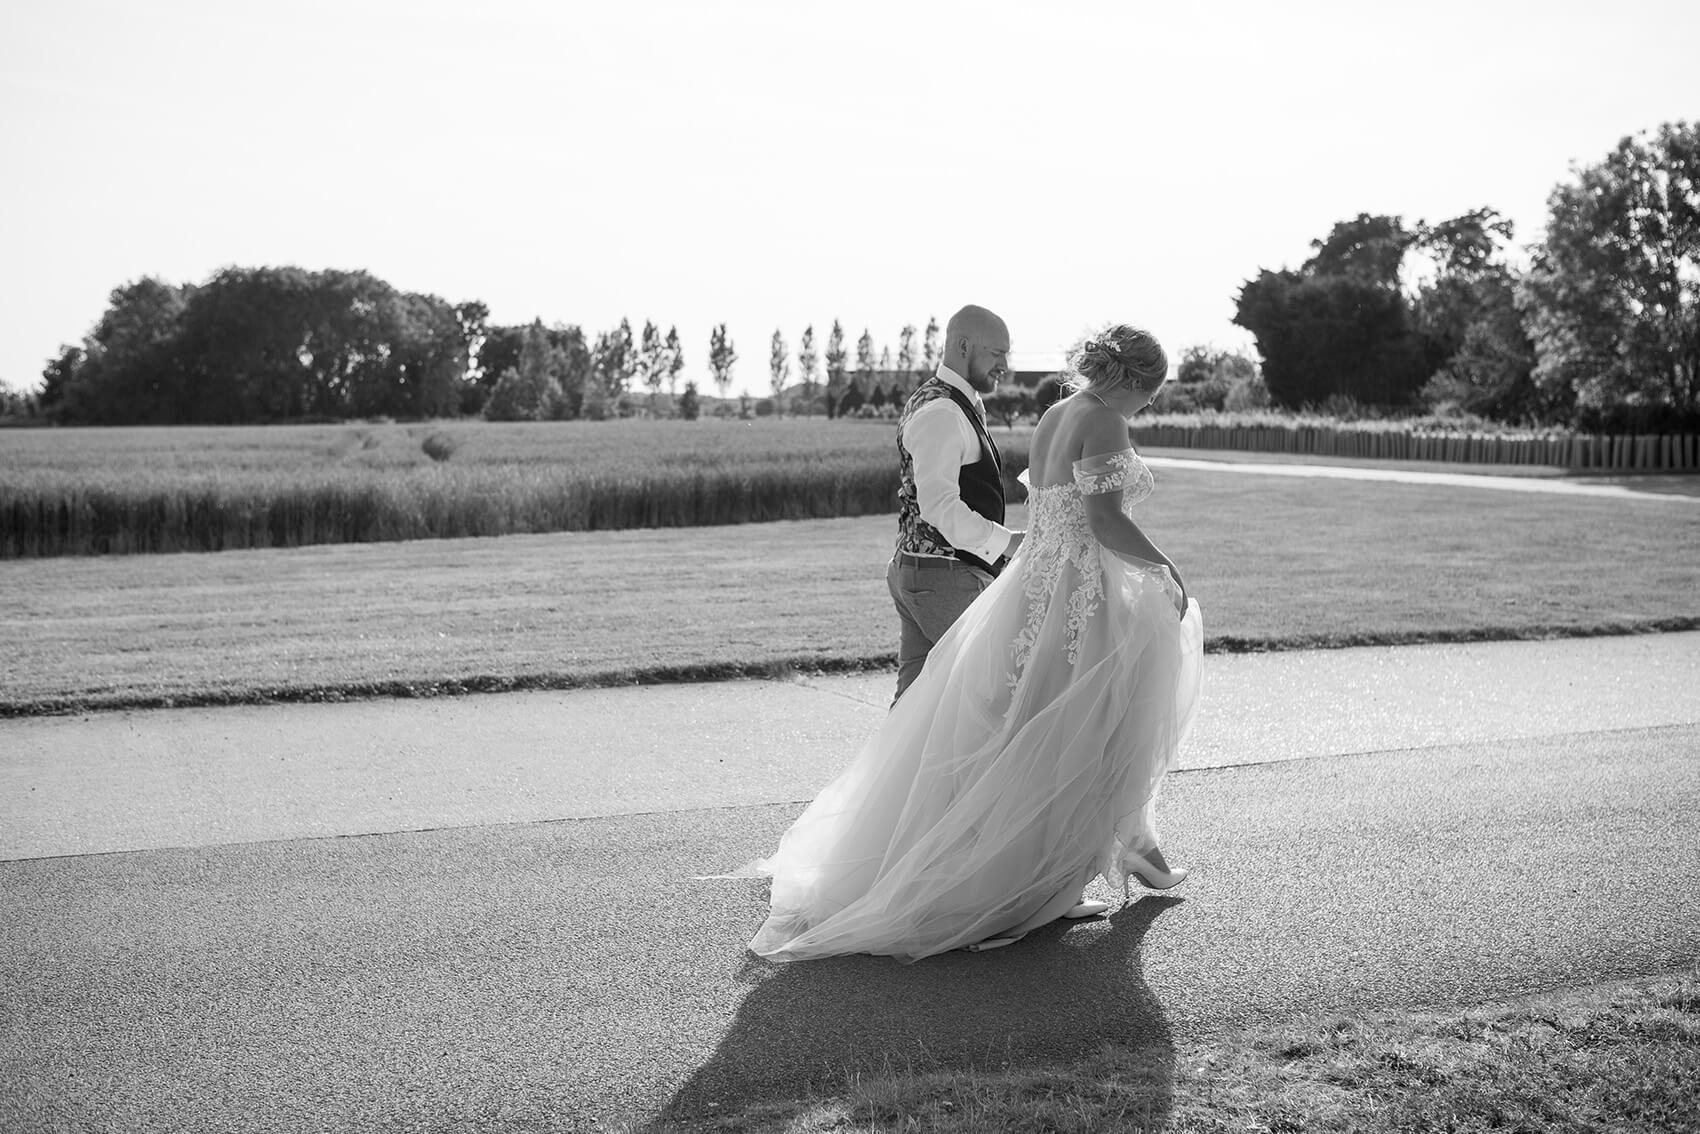 Black and white photo of the bride and groom walking.